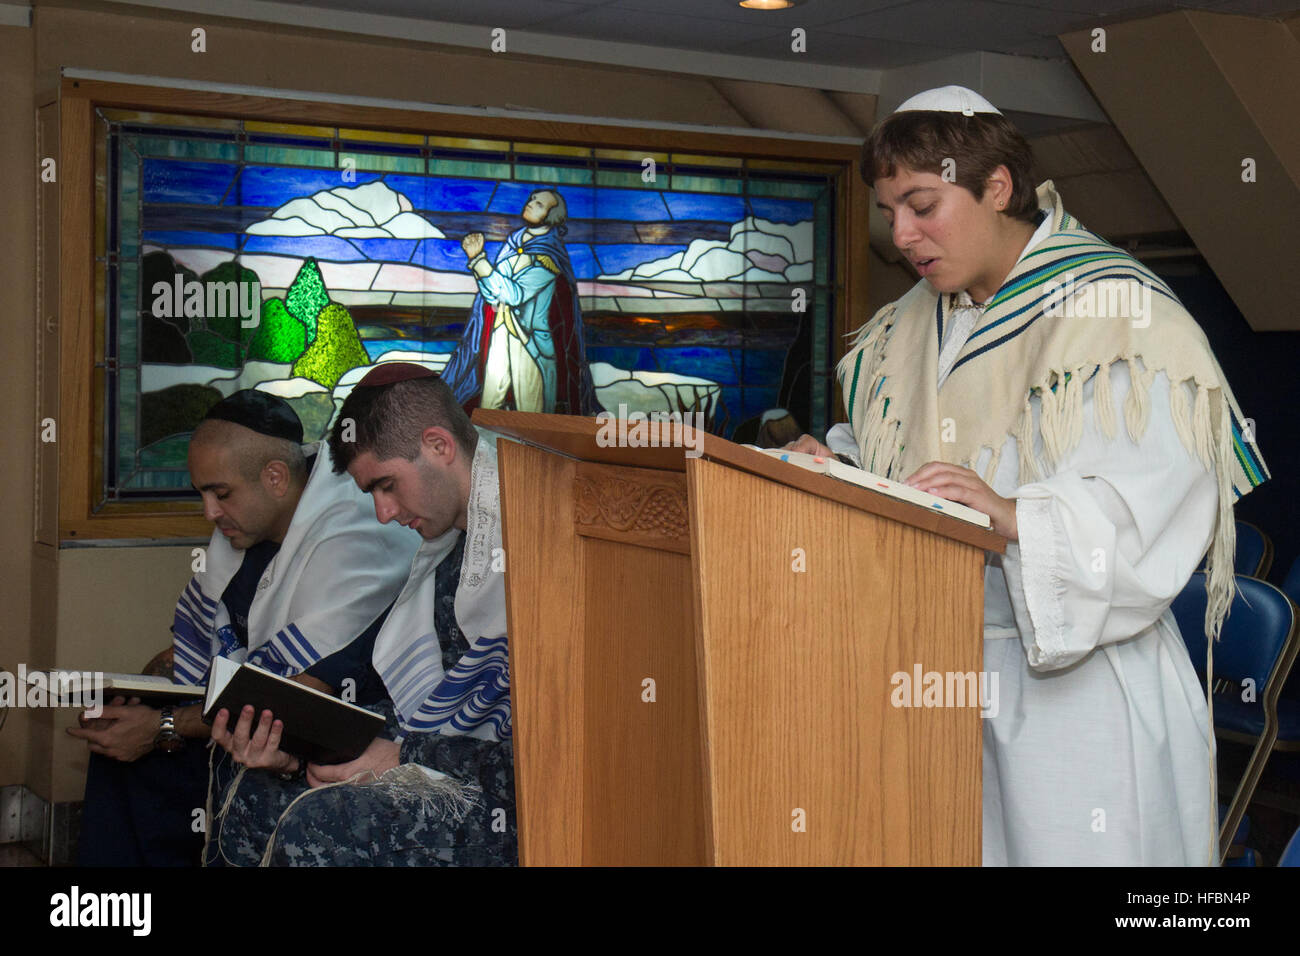 PACIFIC OCEAN (Sept. 25, 2012) Lt. j.g. Yonina Creditor, from Richmond, Va., a Jewish chaplain embarked aboard the aircraft carrier USS George Washington (CVN 73), leads Sailors in prayer during a Yom Kippur service in the ship’s chapel. George Washington and its embarked air wing, Carrier Air Wing (CVW) 5, provide a combat-ready force that protects and defends the collective maritime interest of the U.S. and its allies and partners in the Asia-Pacific region. (U.S. Navy photo by Mass Communication Specialist 3rd Class William Pittman/Released) 120925-N-SF704-119 Join the conversation http://w Stock Photo